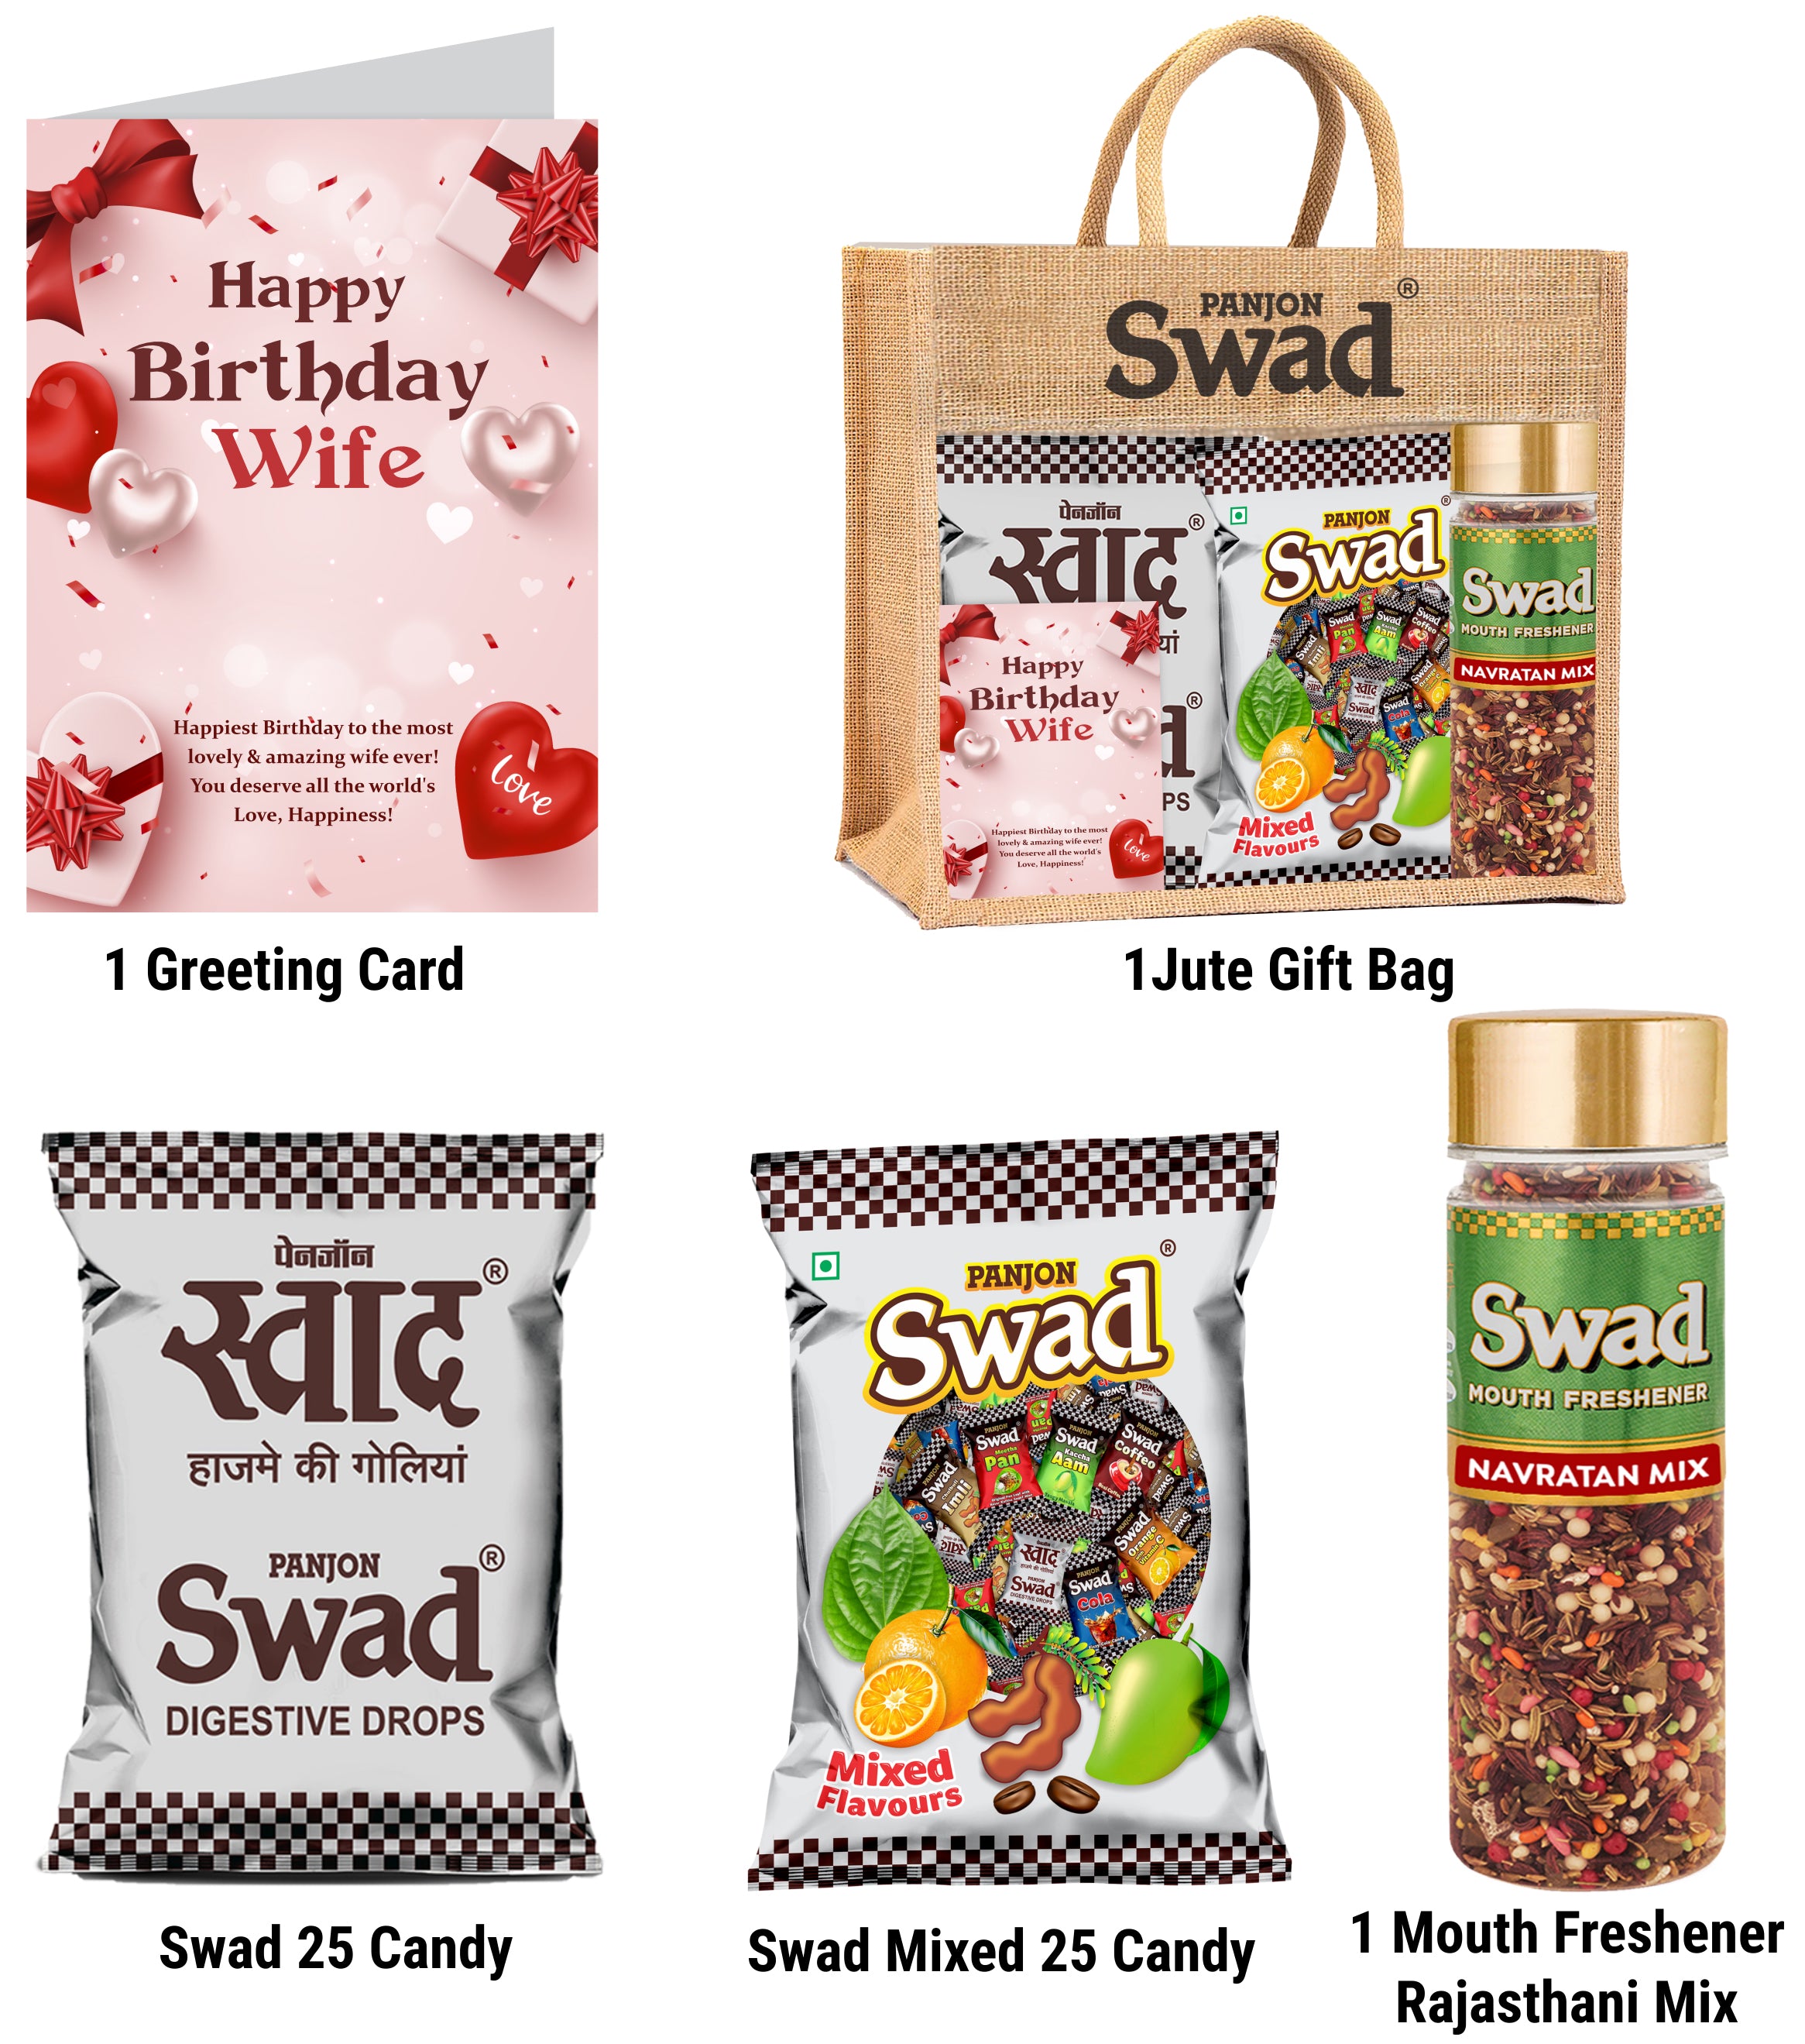 Swad Happy Birthday Wife Gift with Card (25 Swad Candy, 25 Mixed Toffee, Navratan Mix Mukhwas) in Jute Bag